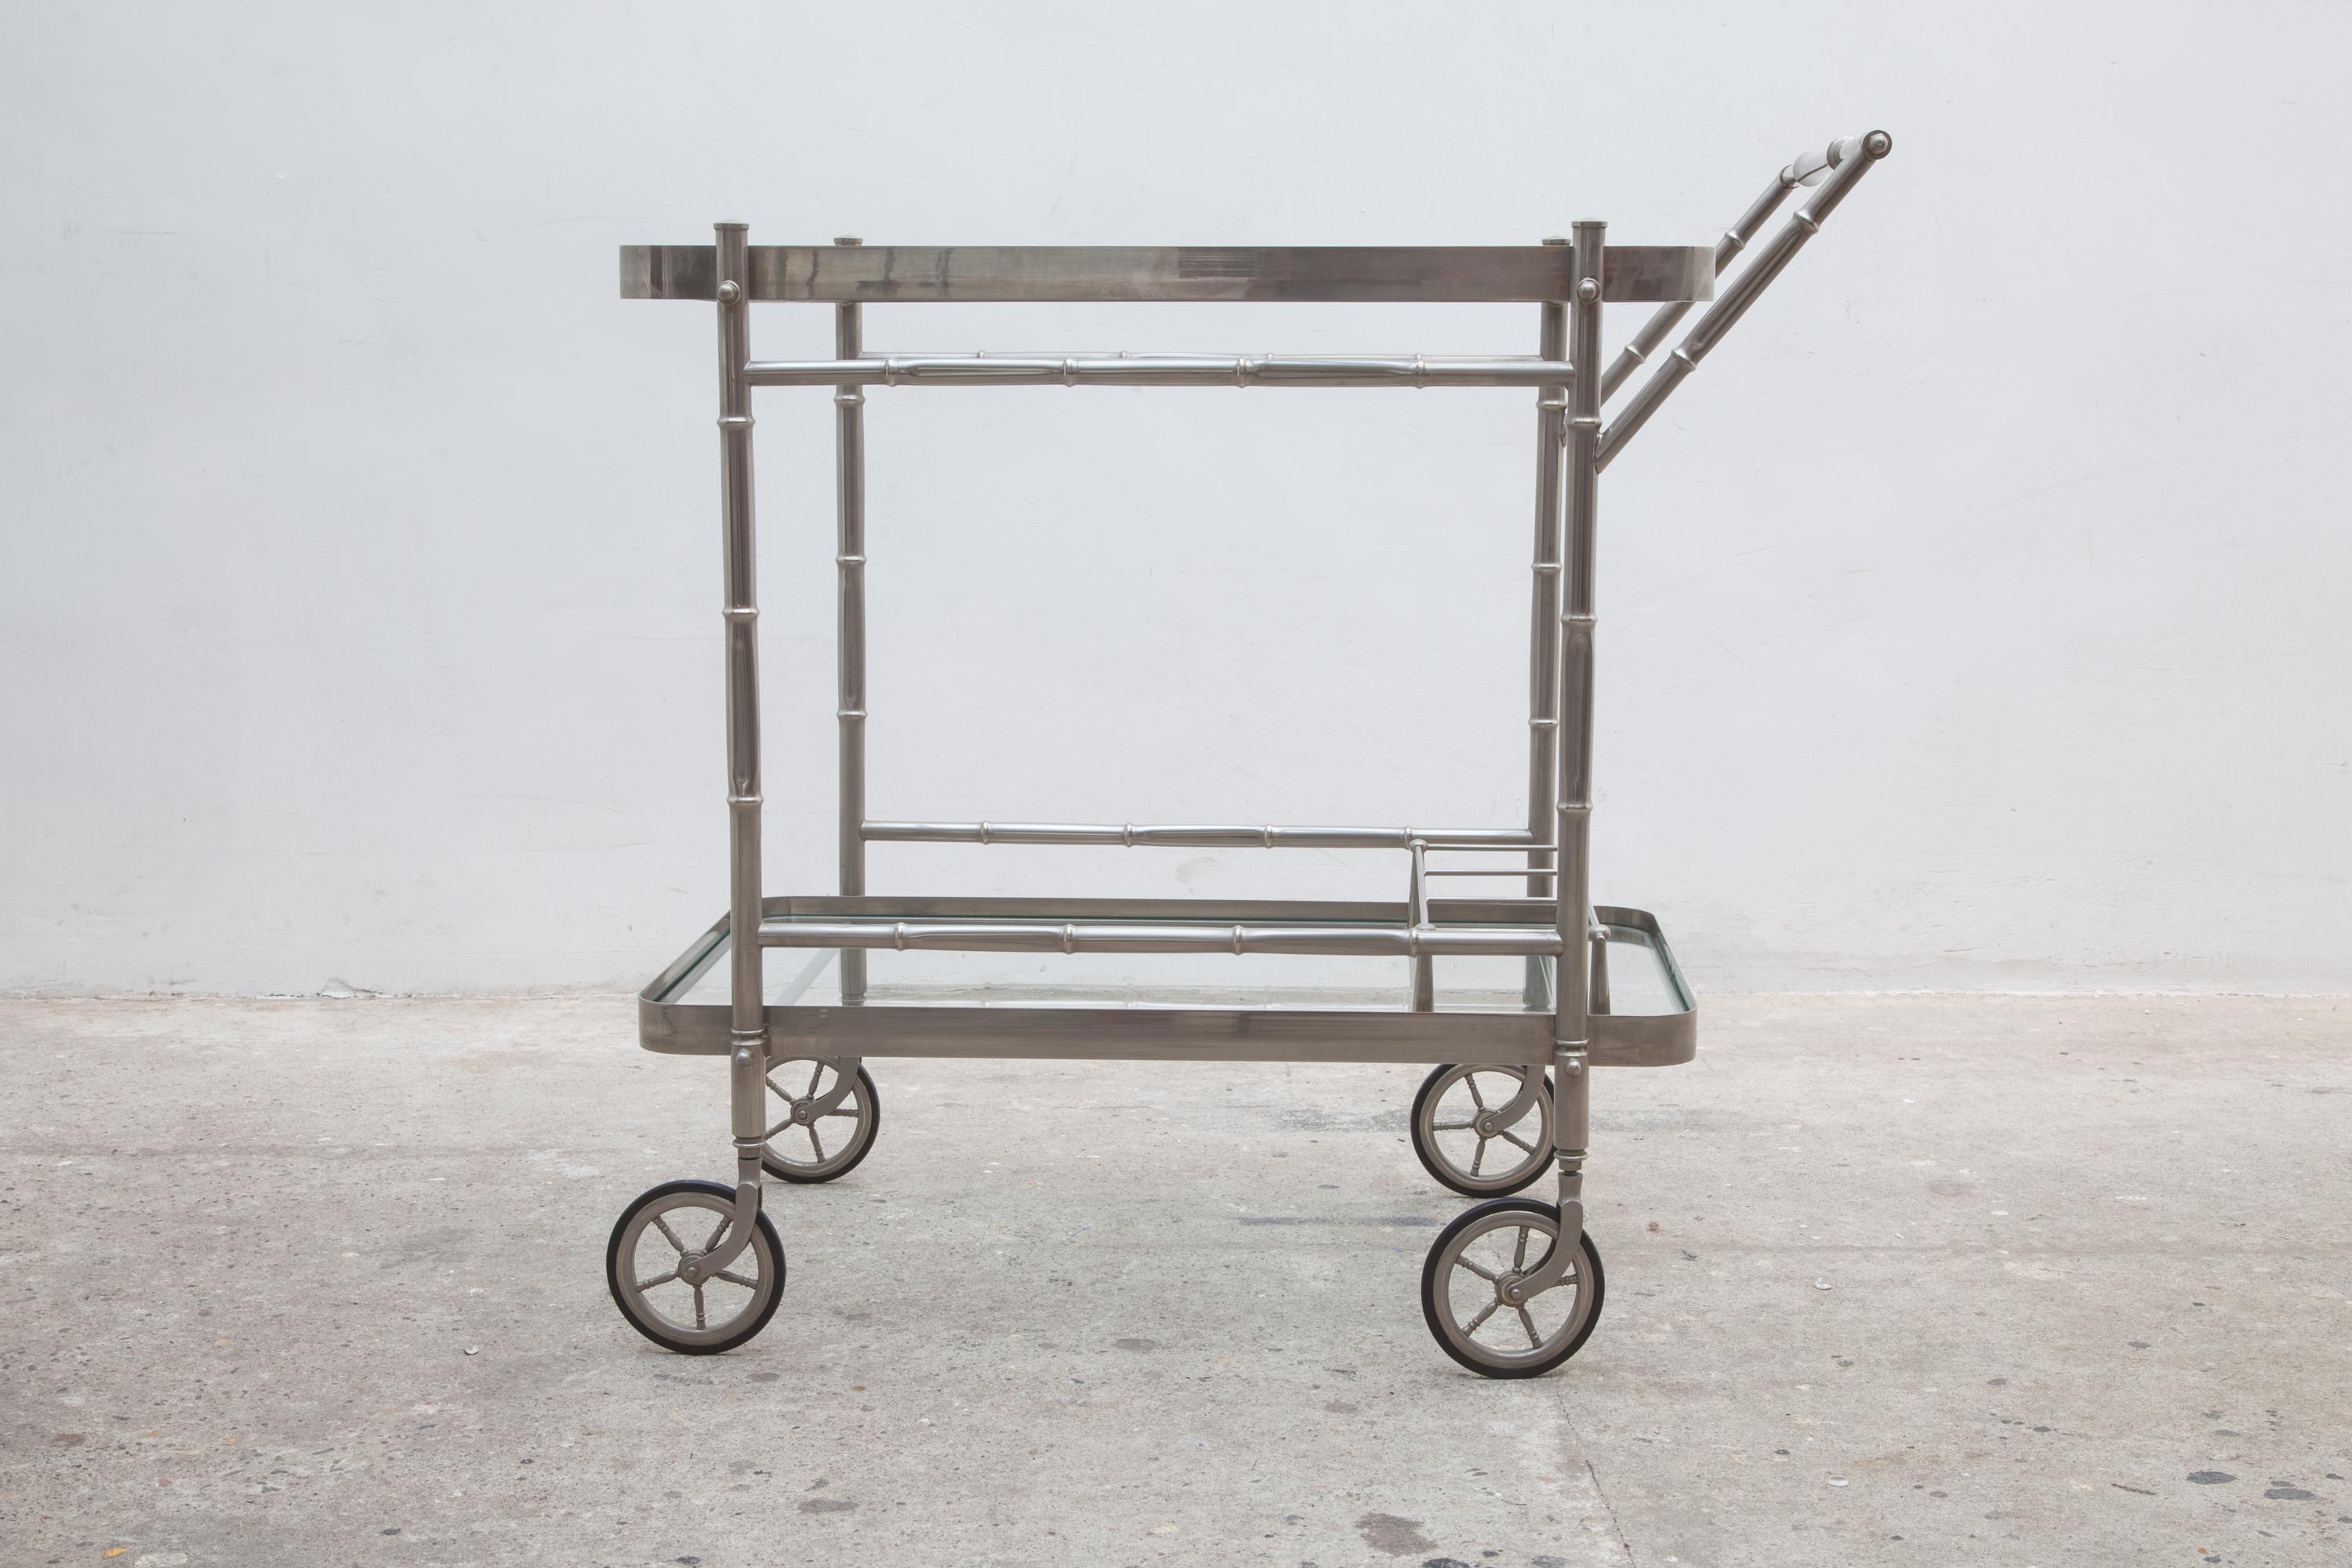 Vintage French bar cart, trolley by Maison Baguès.Chrome, satin finish metal faux bamboo with clear glass shelves, removable tray,
and bottle holders on the bottom. Rubber wheels.Very sharp style and flawless details for this midcentury drinks